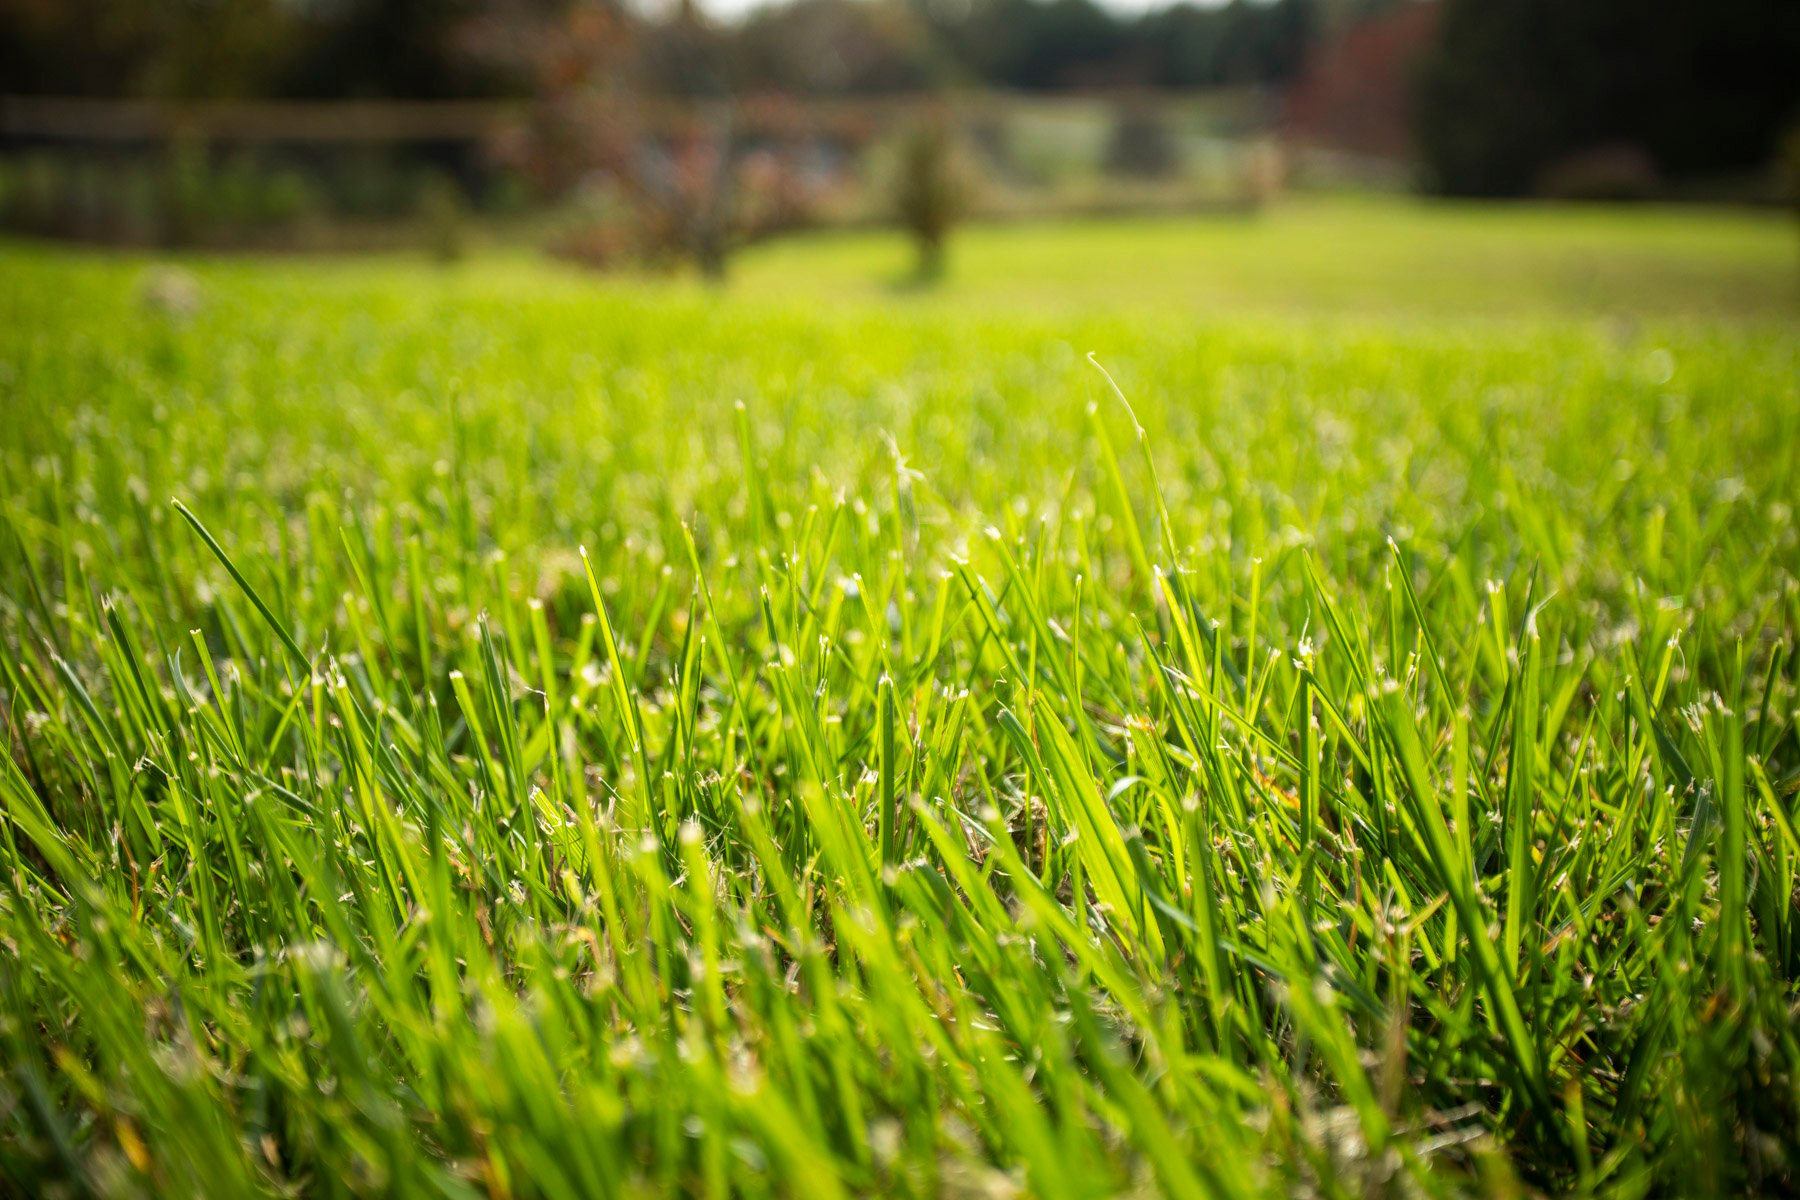 Don't cut your lawn too short